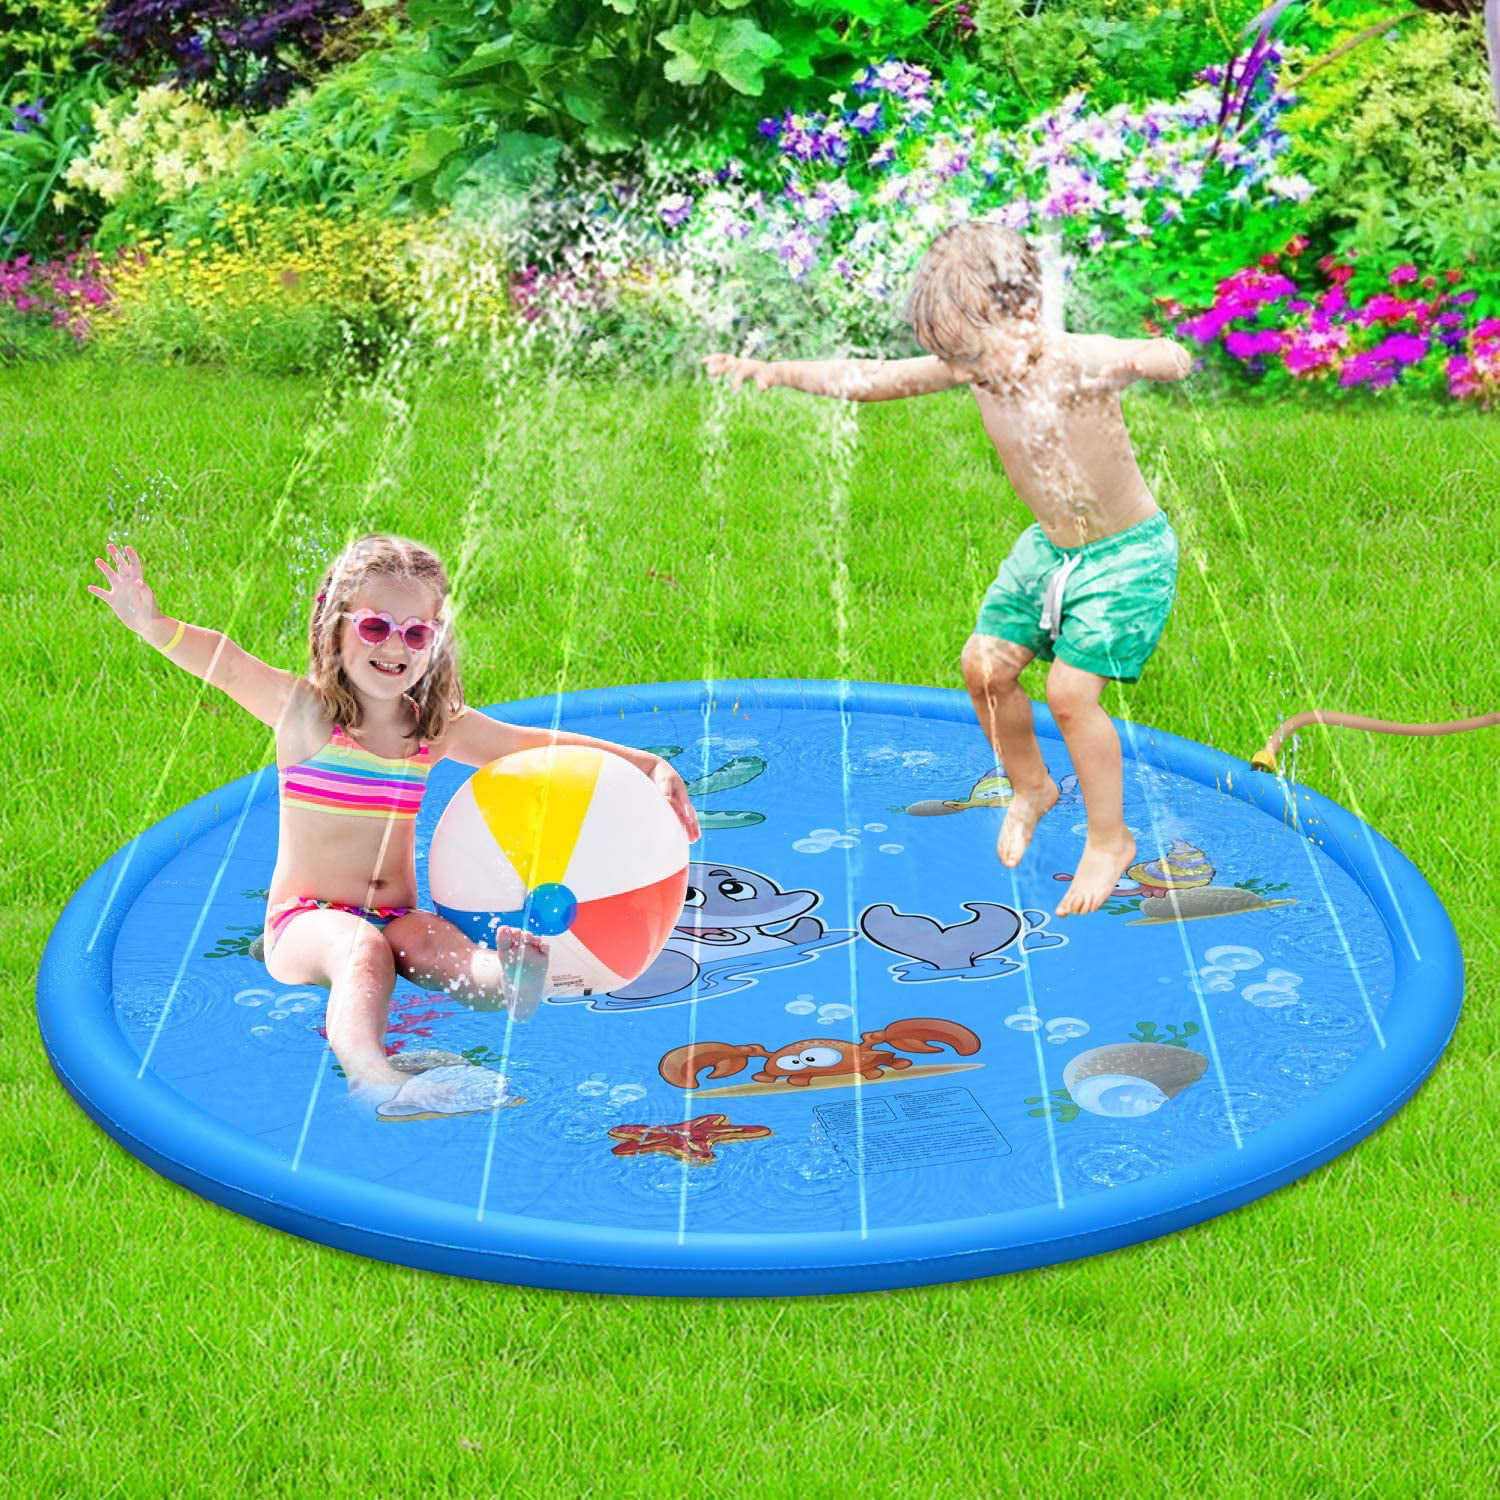 68" Inflatable Spray Splash Water Mat Kids Play Pad Outdoor Pool Beach Lawn Toys 